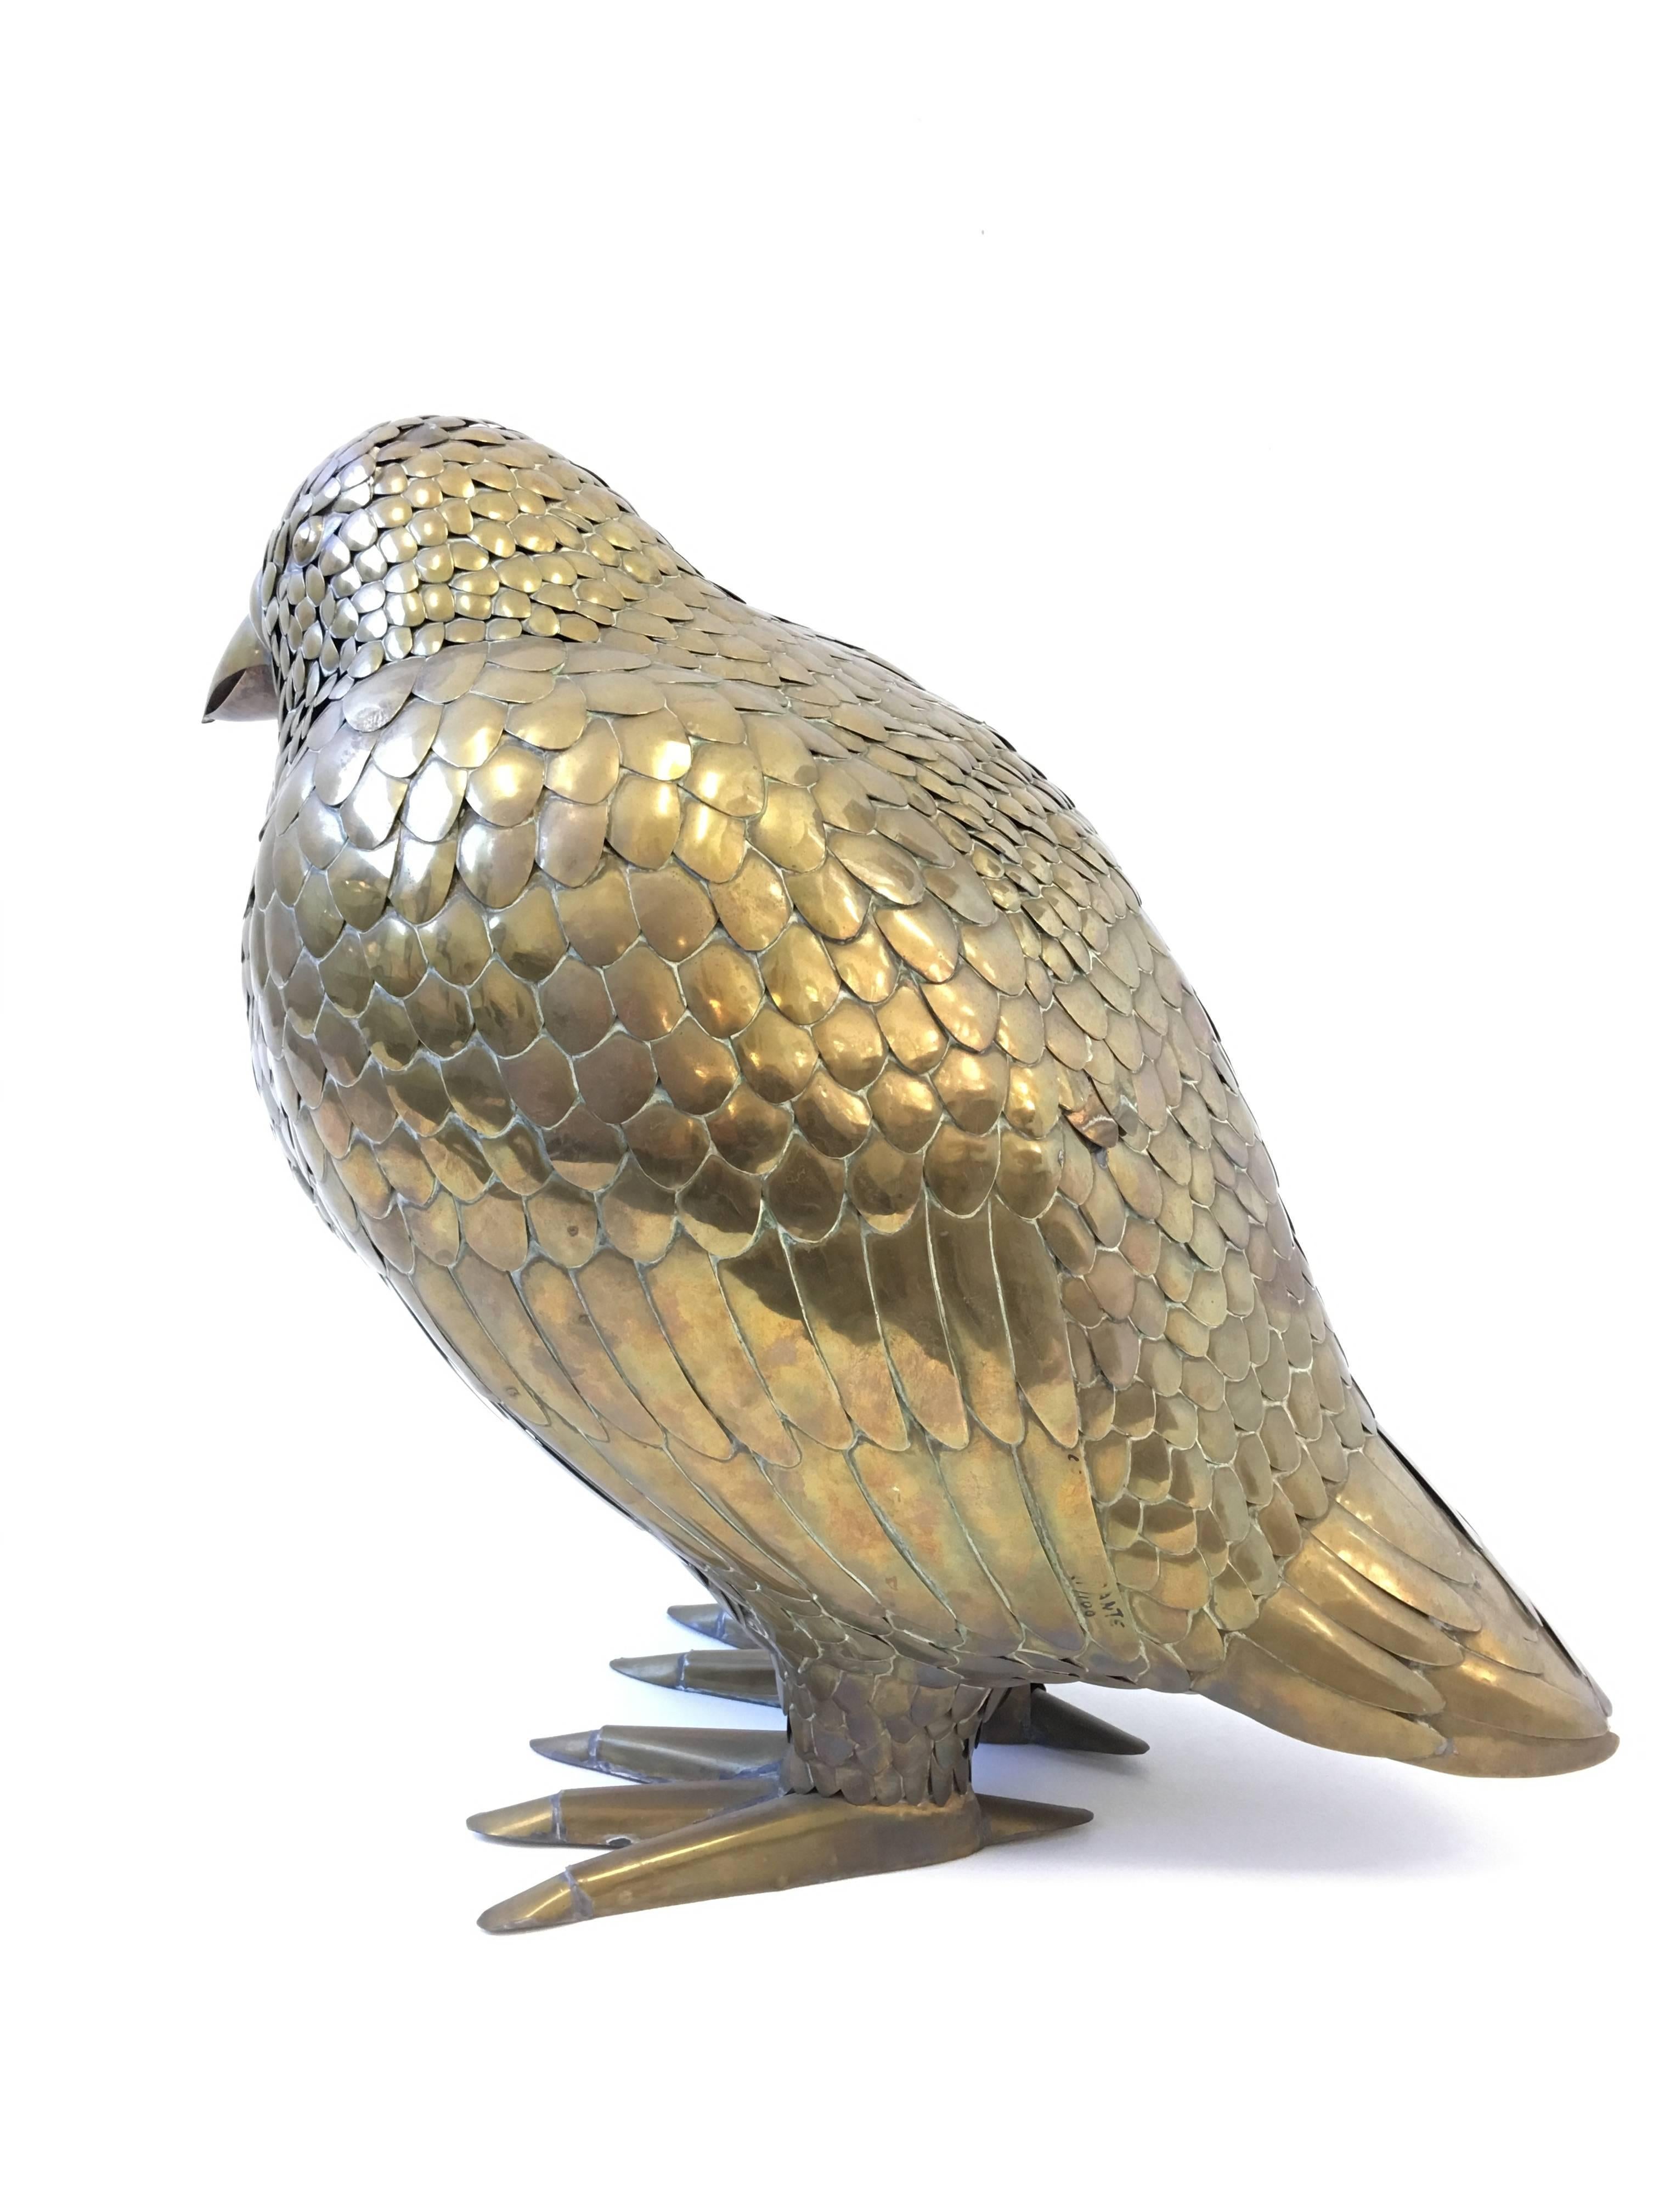 A beautiful 1970s brass bird sculpture by renowned Mexican Sculptor Sergio Bustamante.
It's signed and numbered out of 100. But the part of signature has been wiped off. ( see detail photos).
Dimensions: 17.5 high, 19